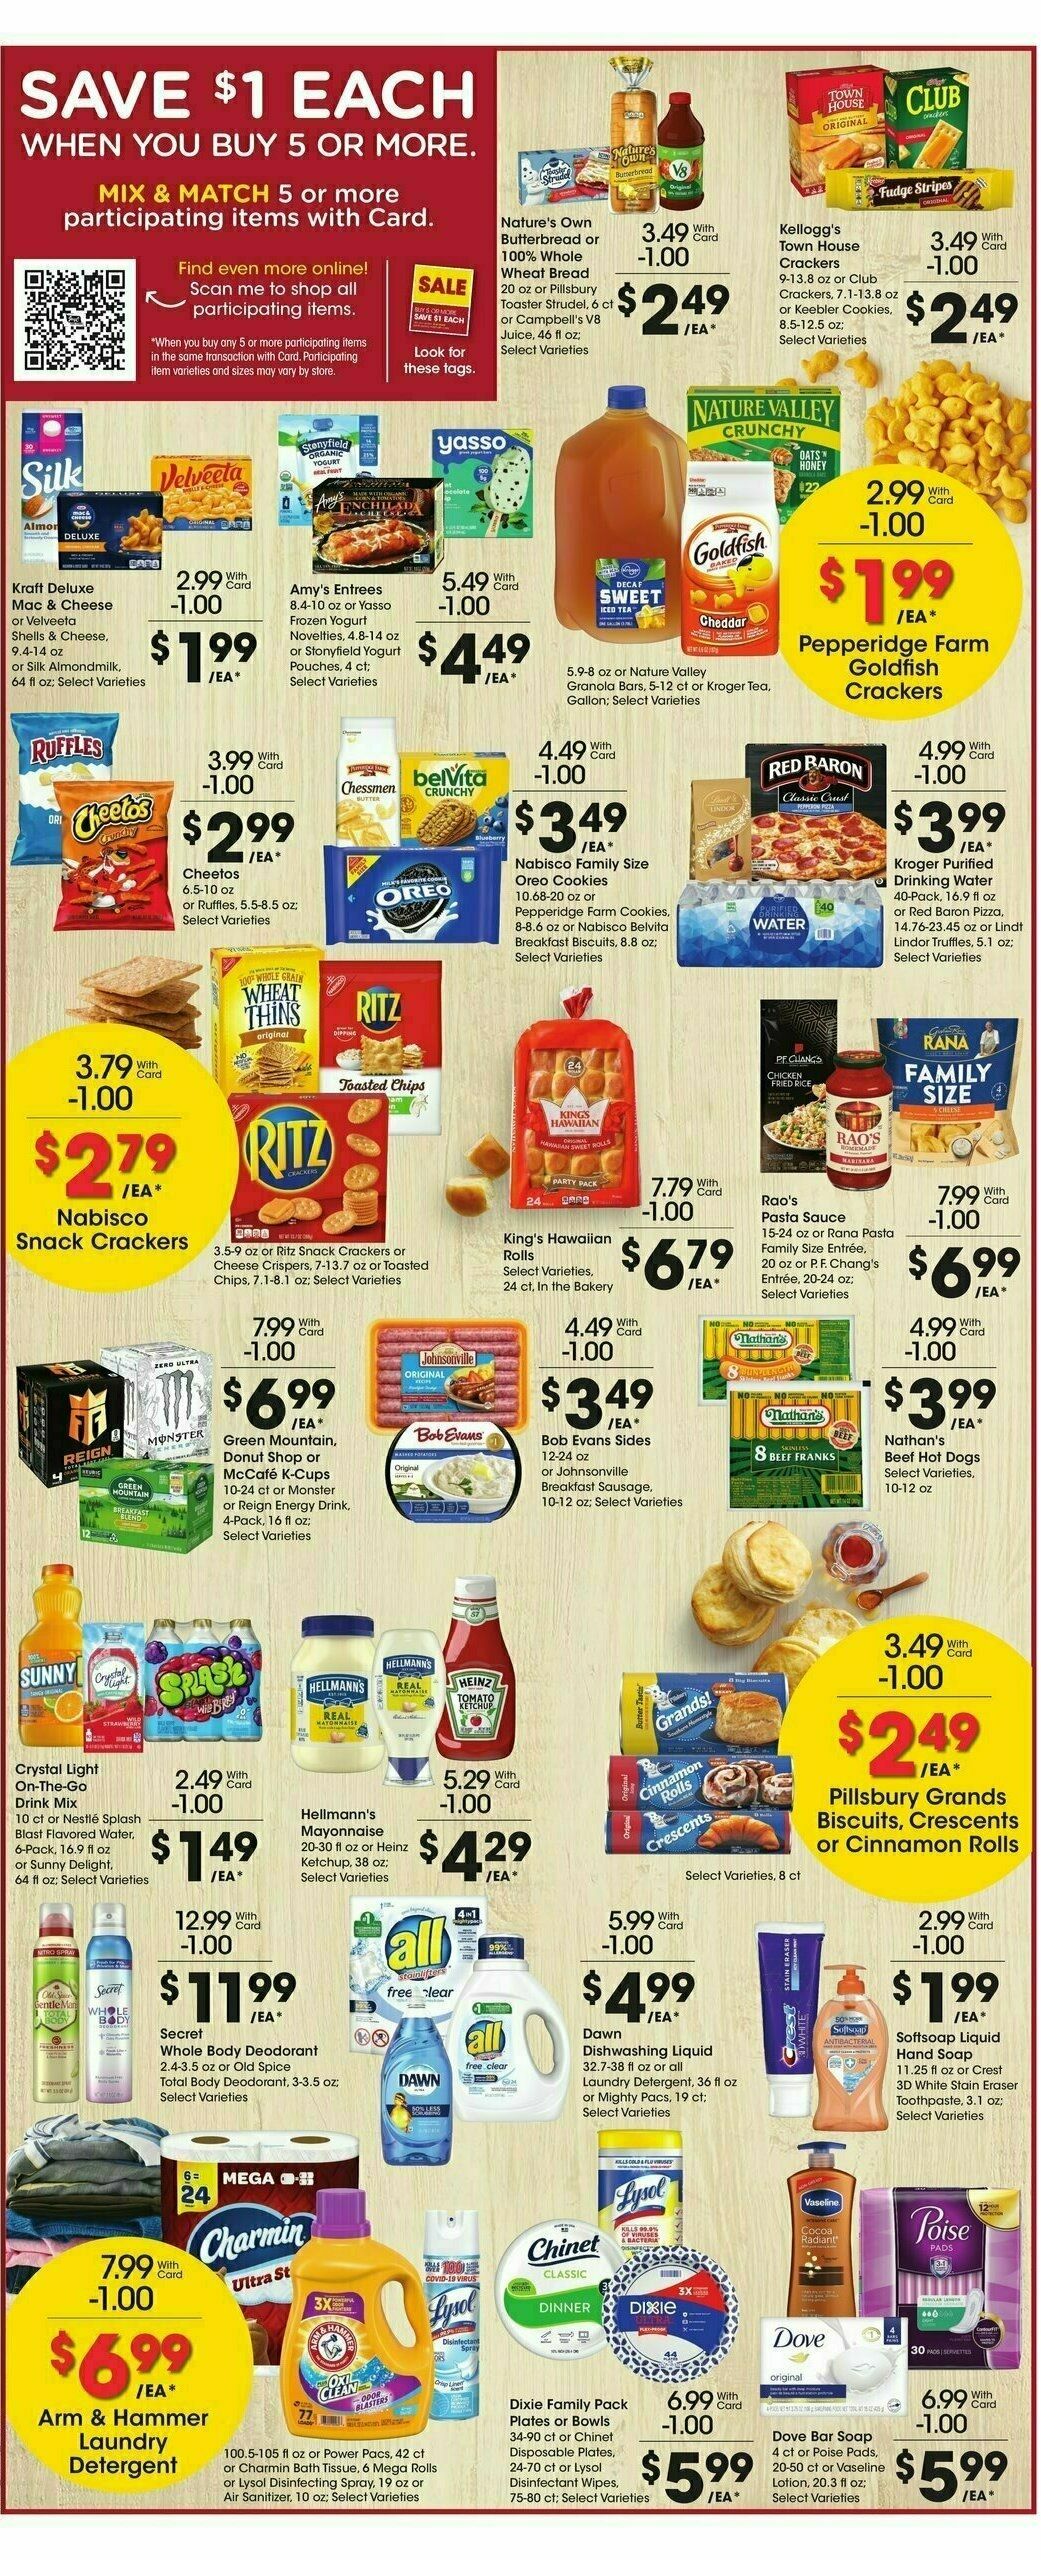 Jay C Food Weekly Ad from January 24